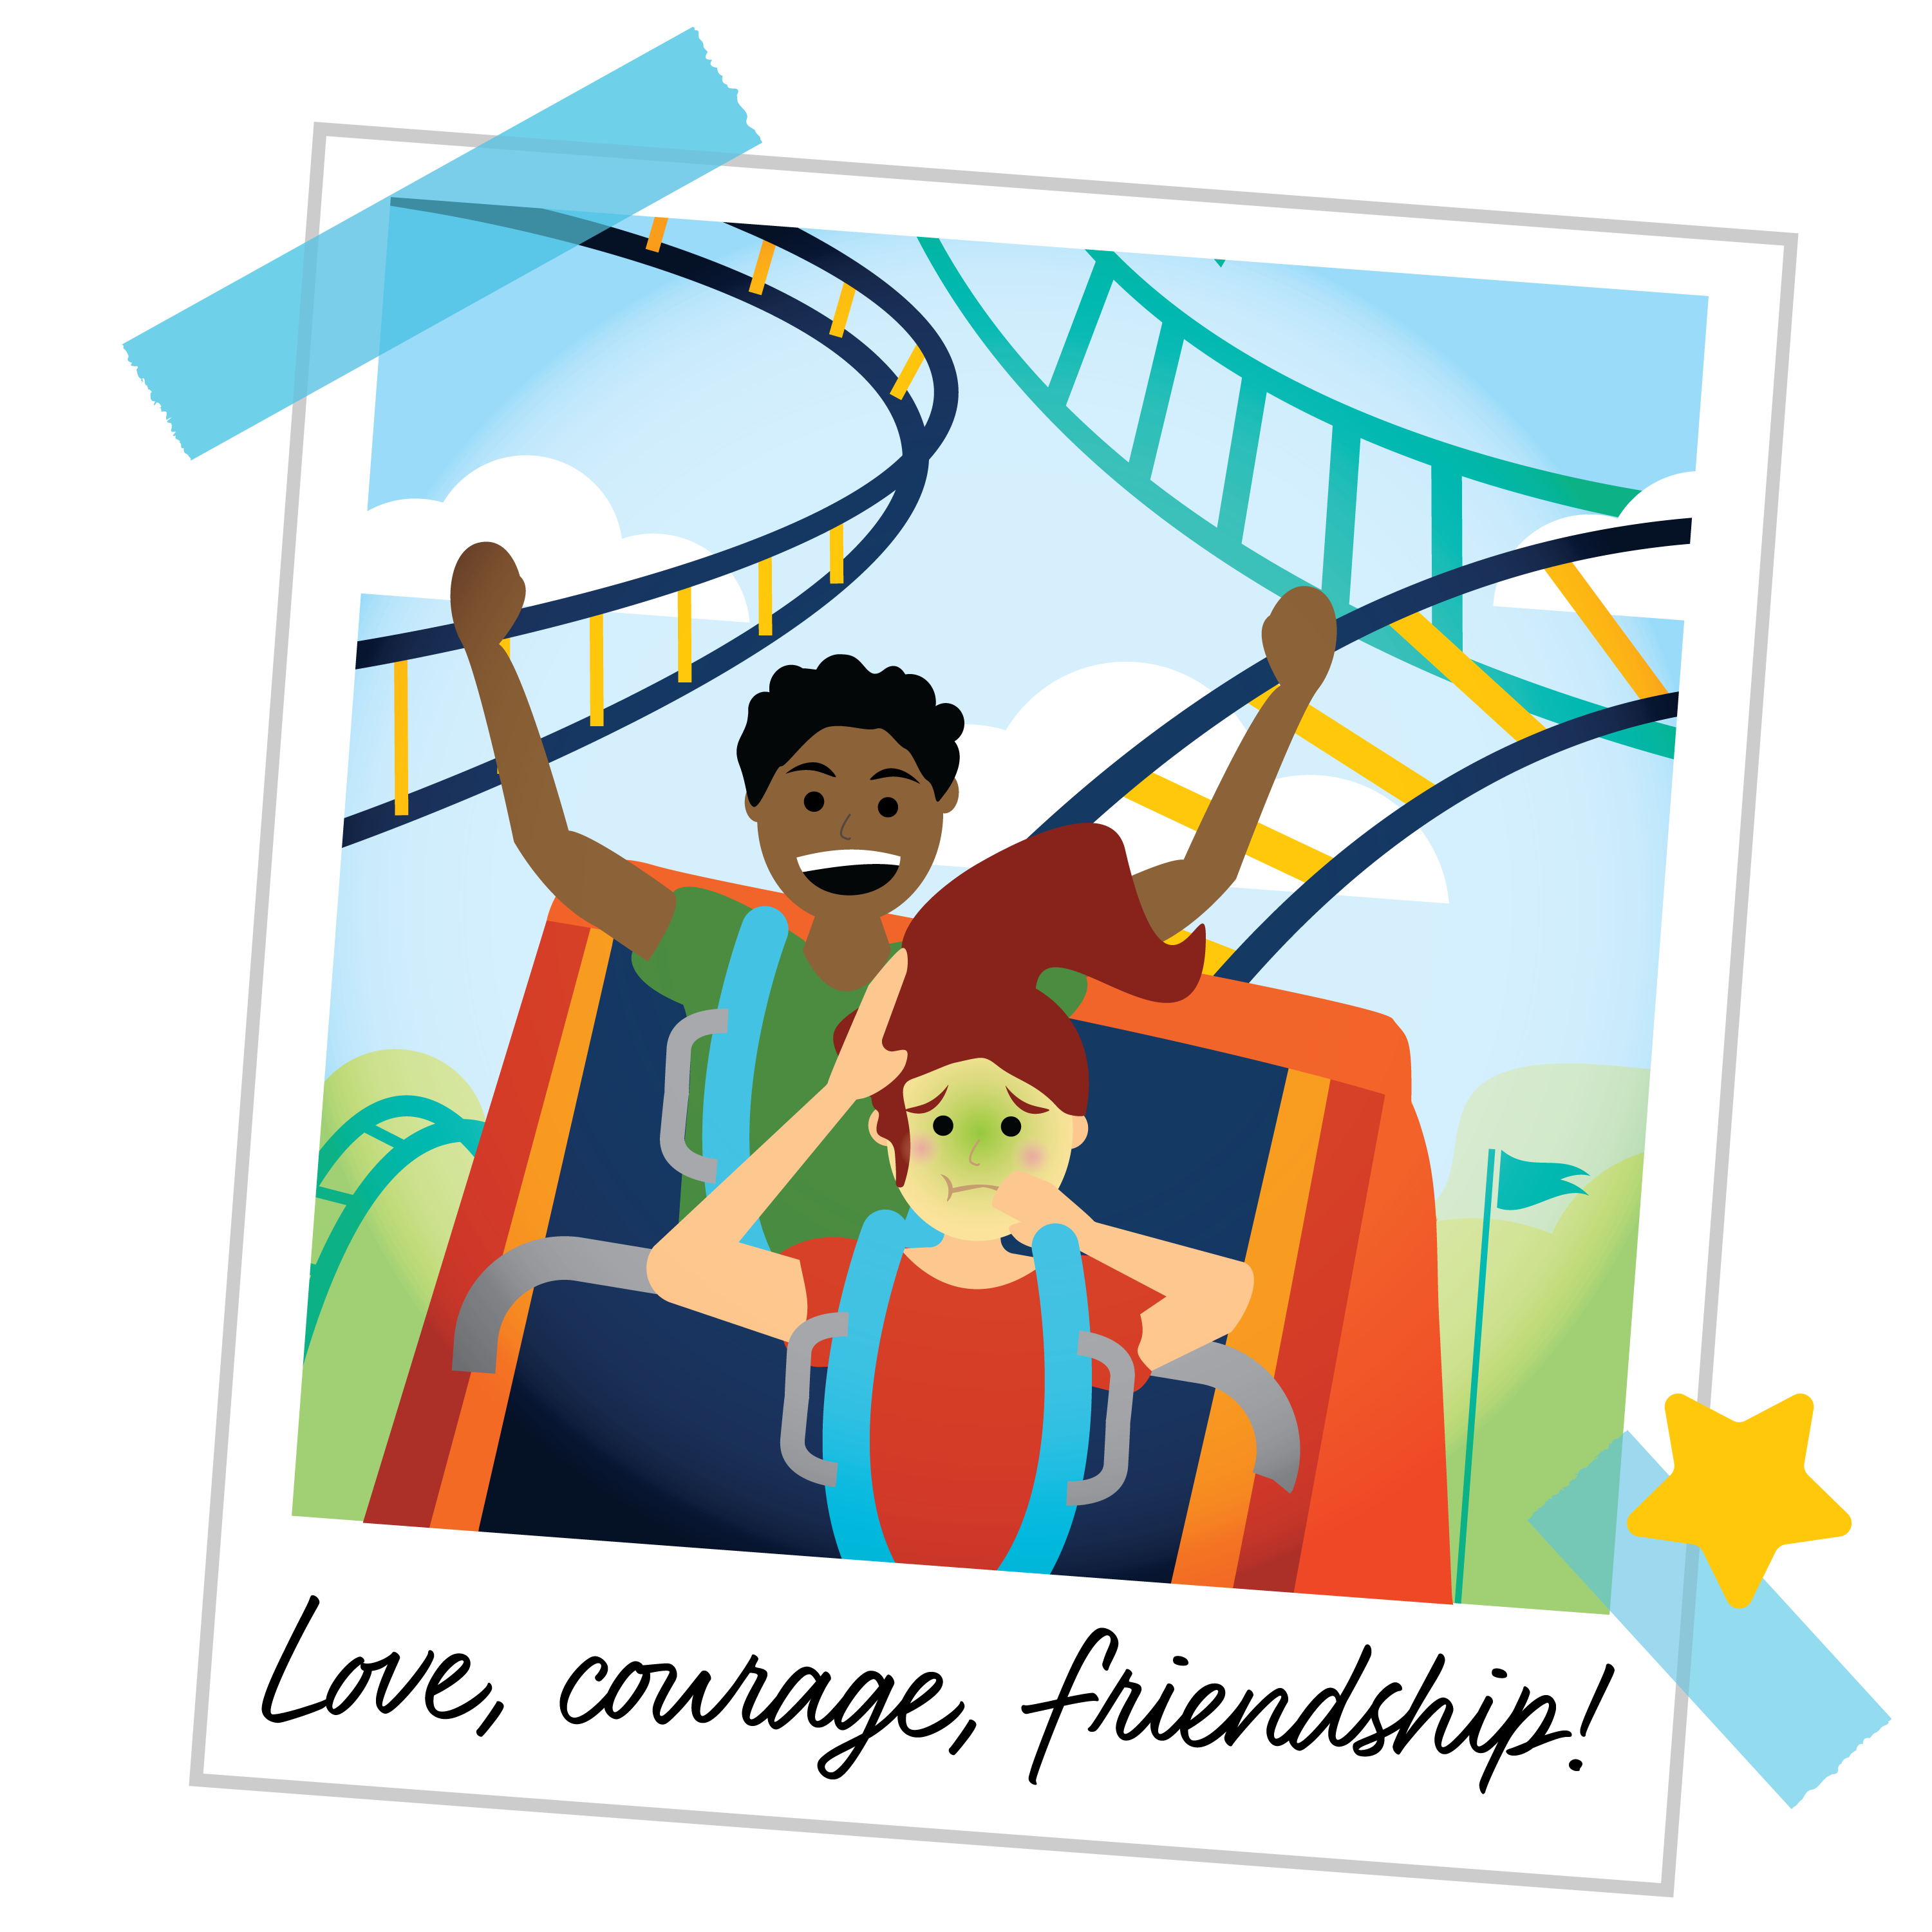 polaroid photo style cartoon image of two students on a roller coaster: one cheering, and one looking sick; love, courage, friendship written on the bottom of the image 